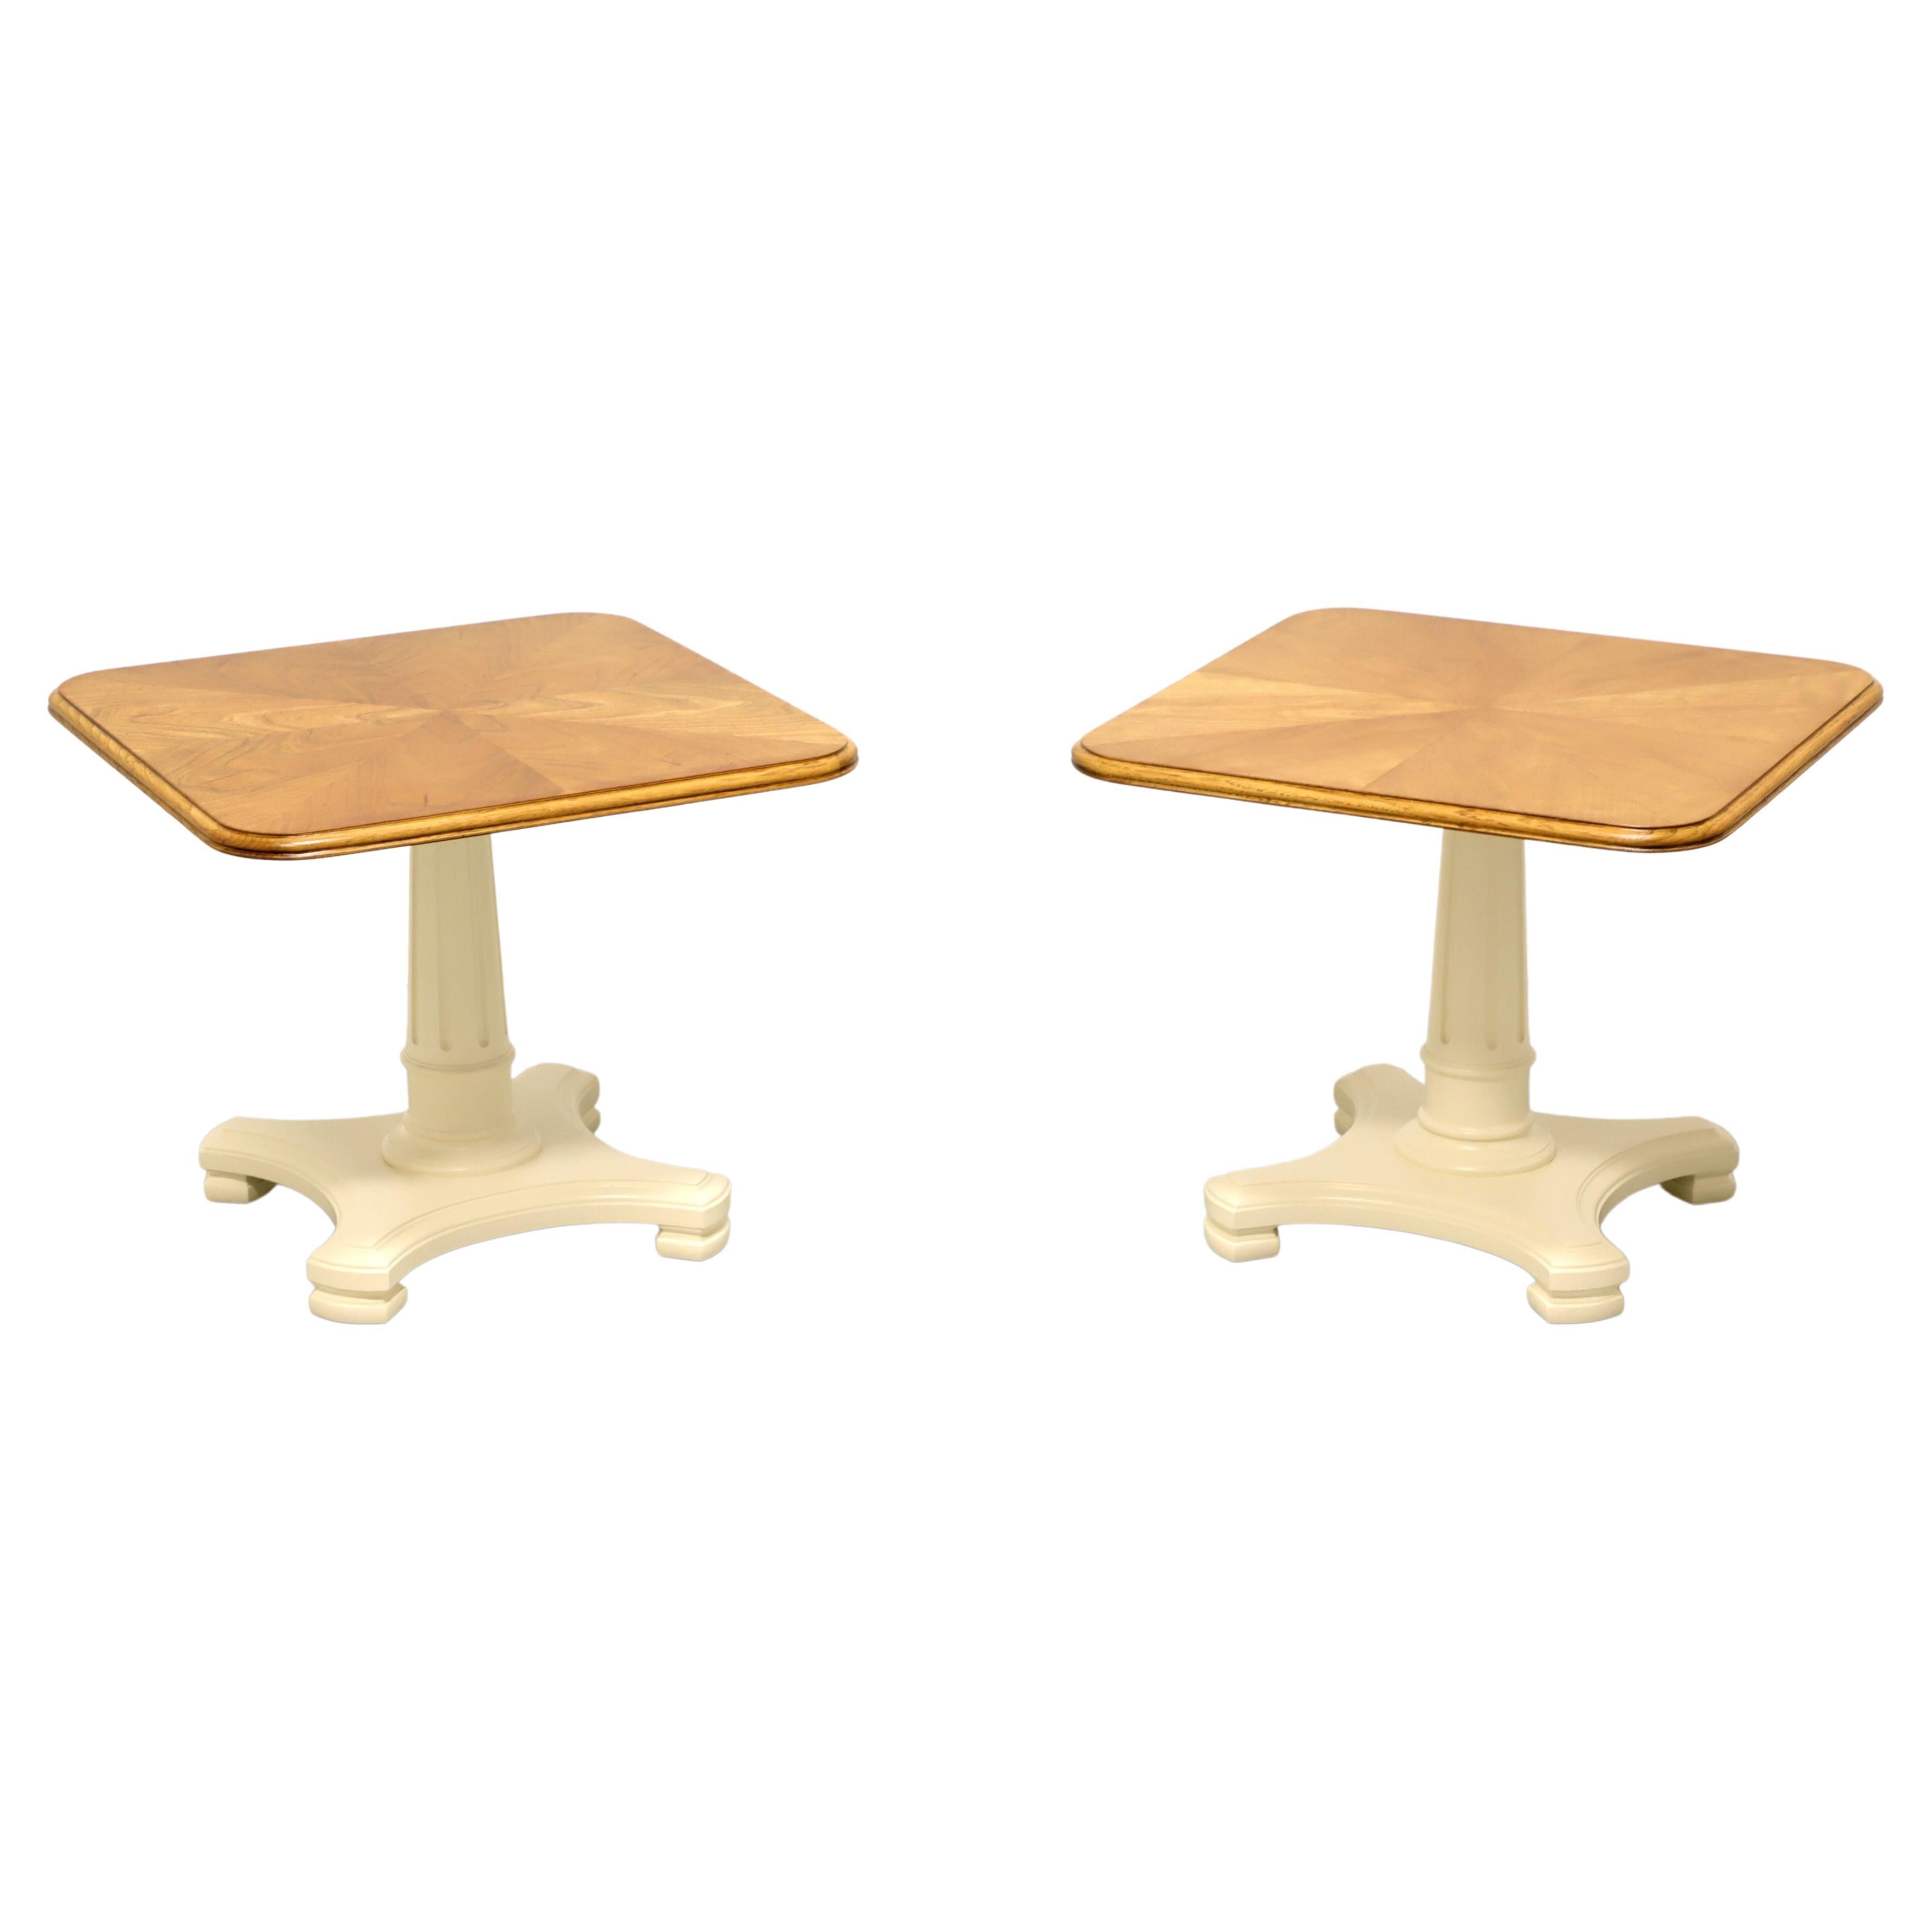 HENREDON Mid 20th Century Neoclassical Cocktail Tables - Pair